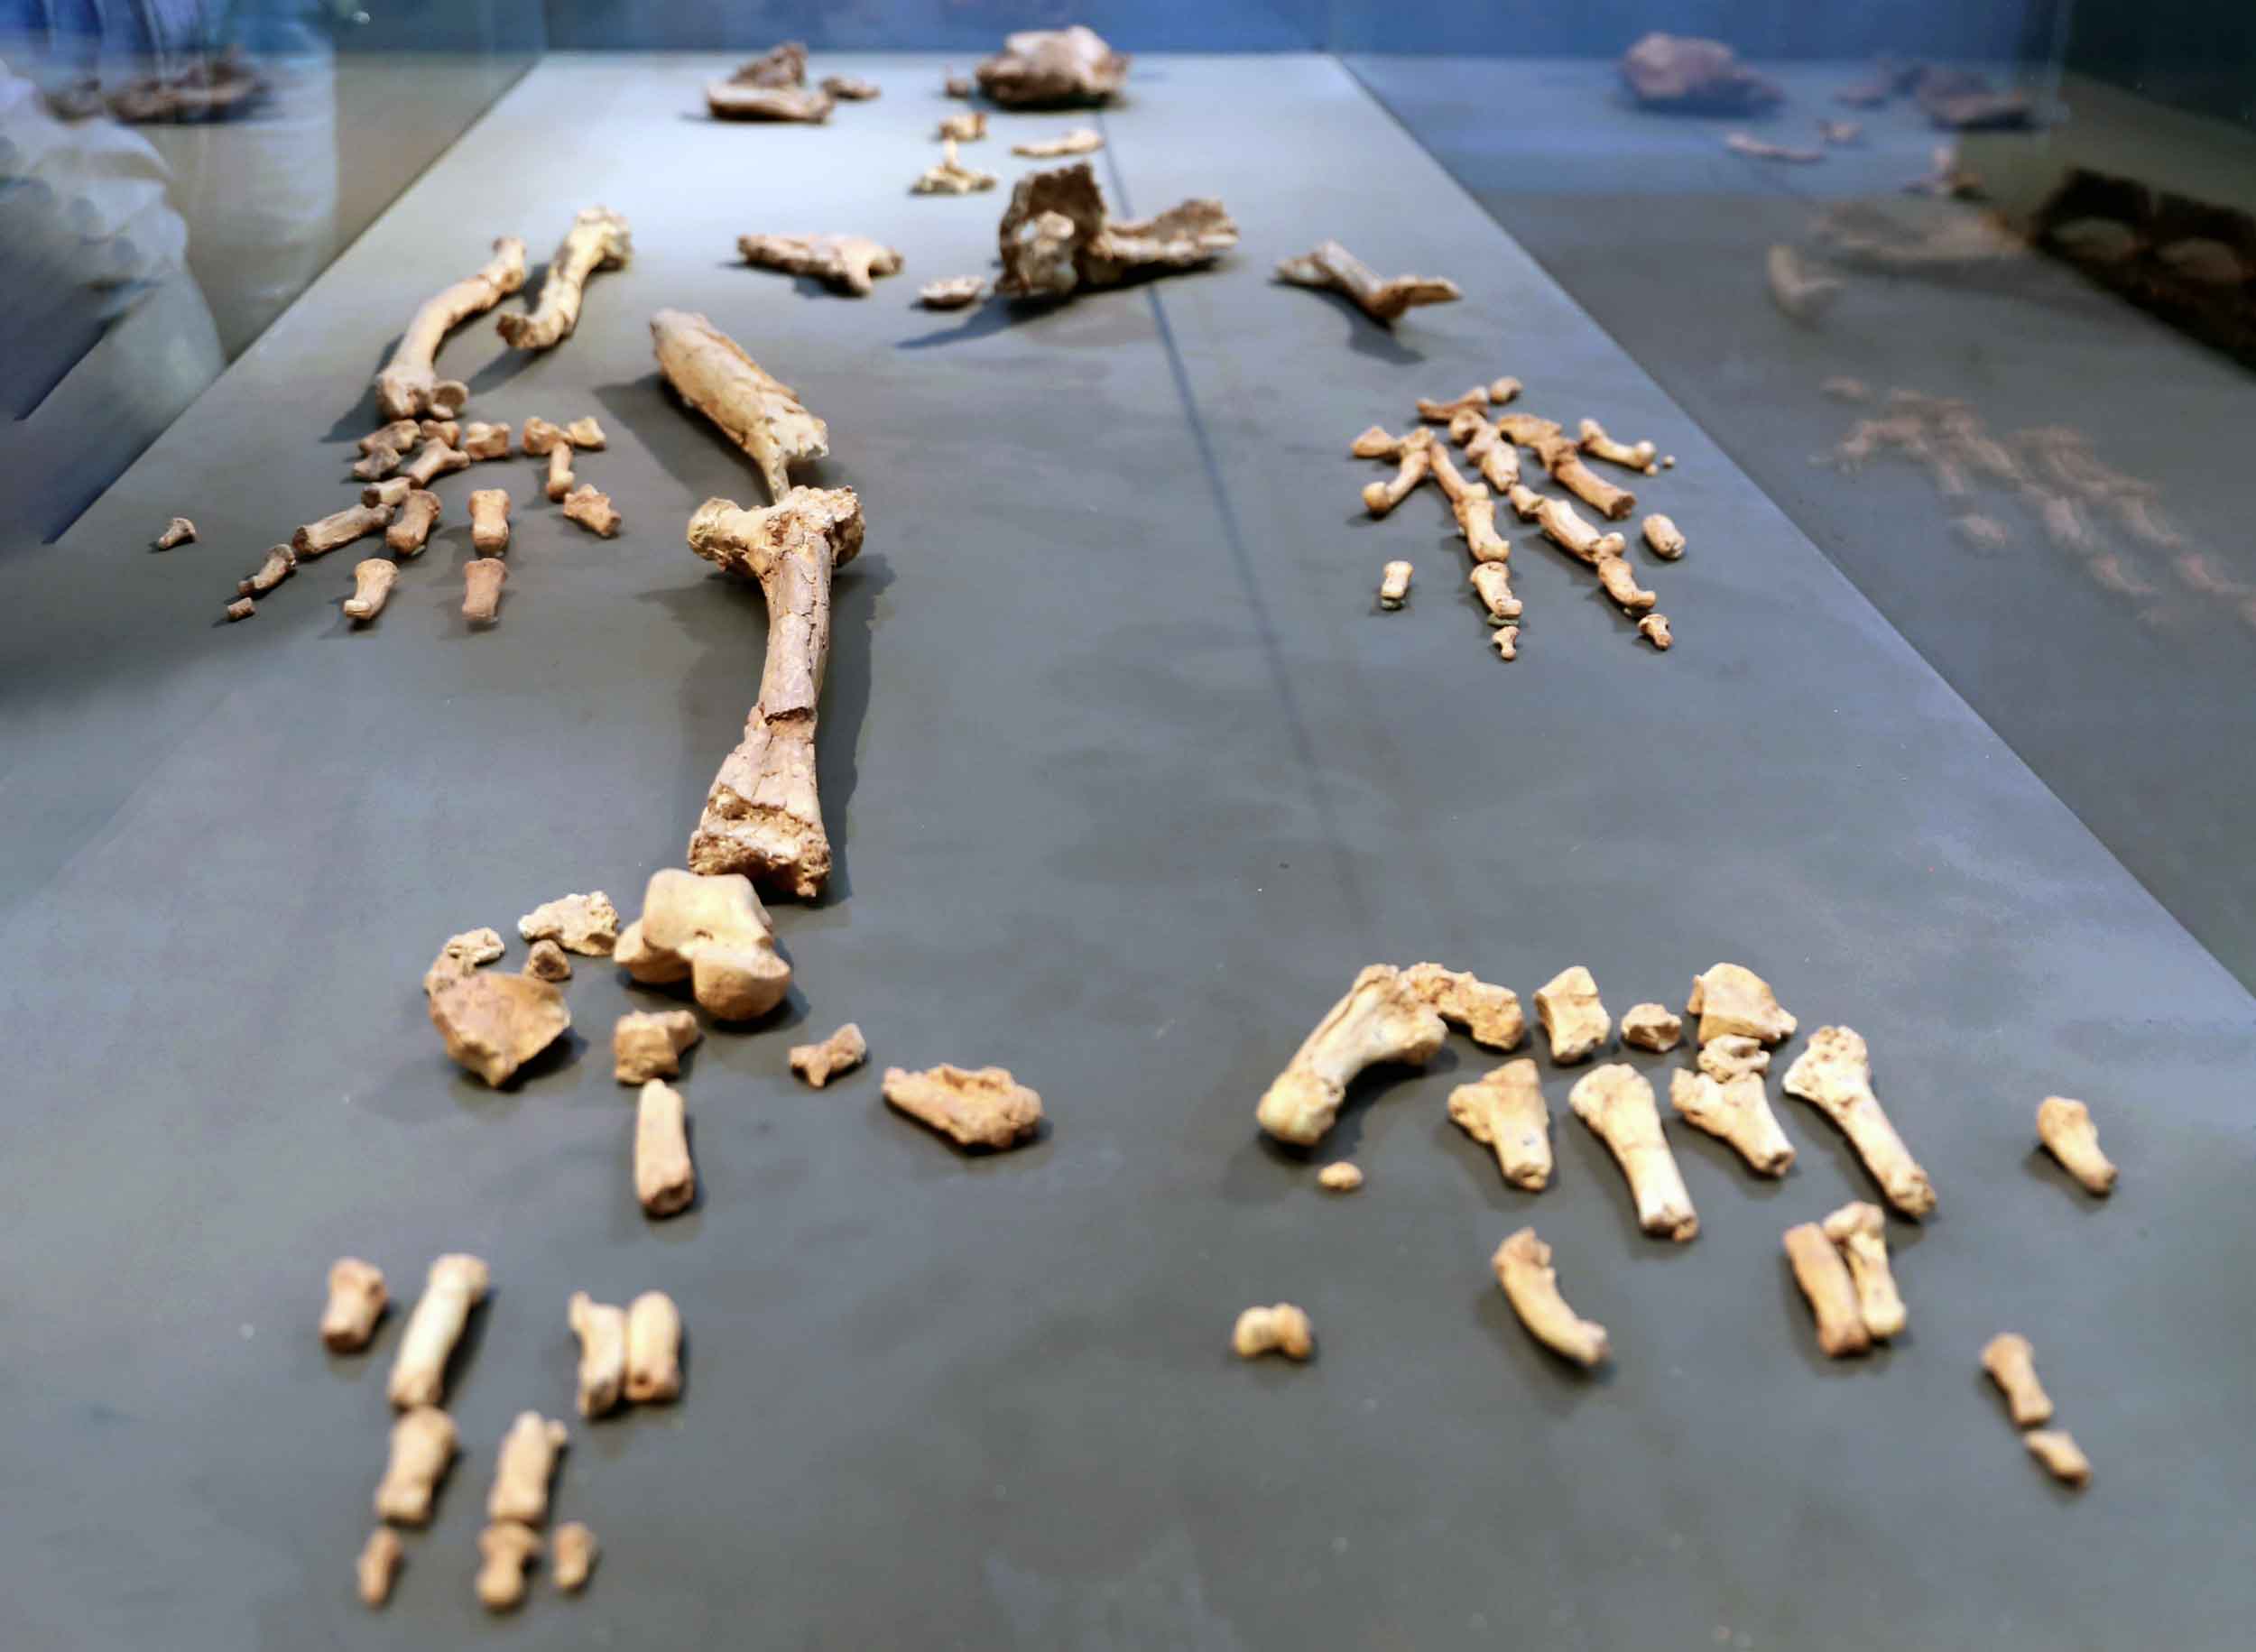 Skeleton with bones and fragments in a display case